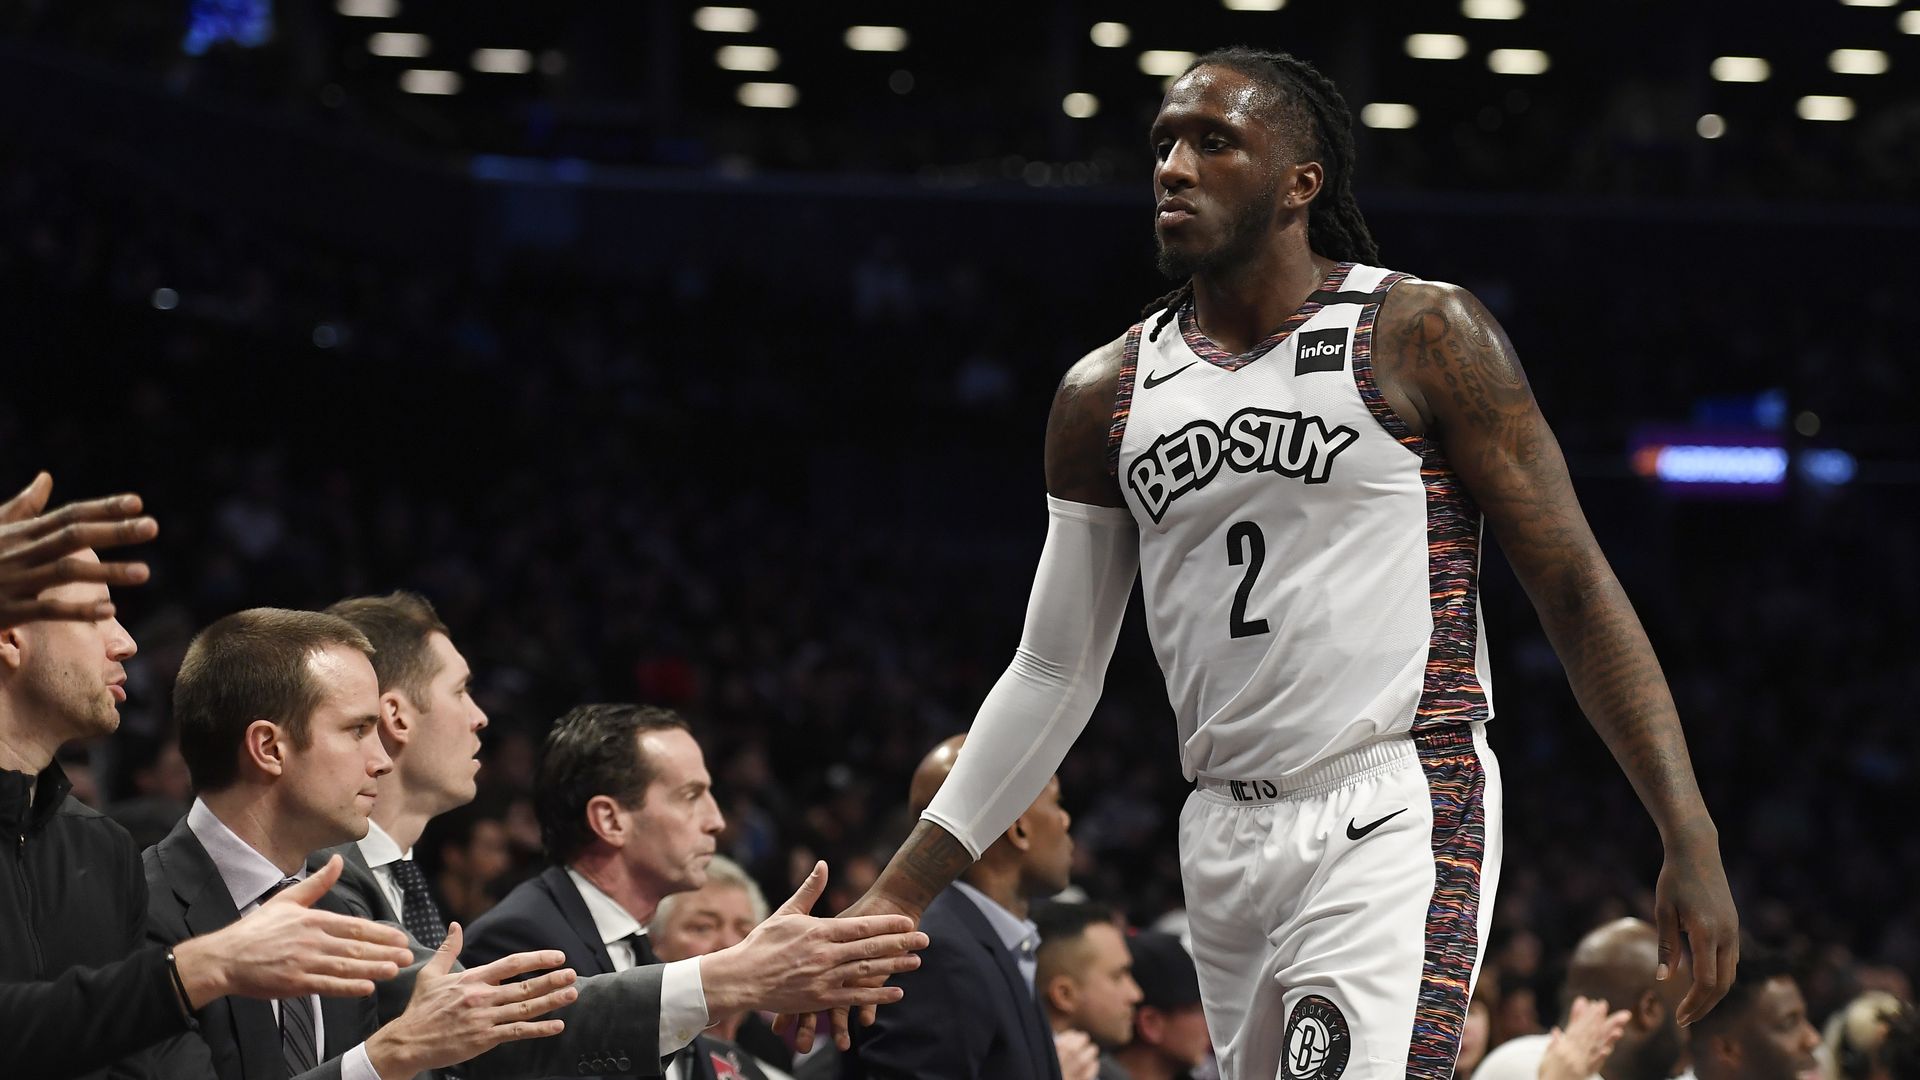 The Brooklyn Nets' Taurean Prince high-fiving coaches in a game against the Miami Heat 